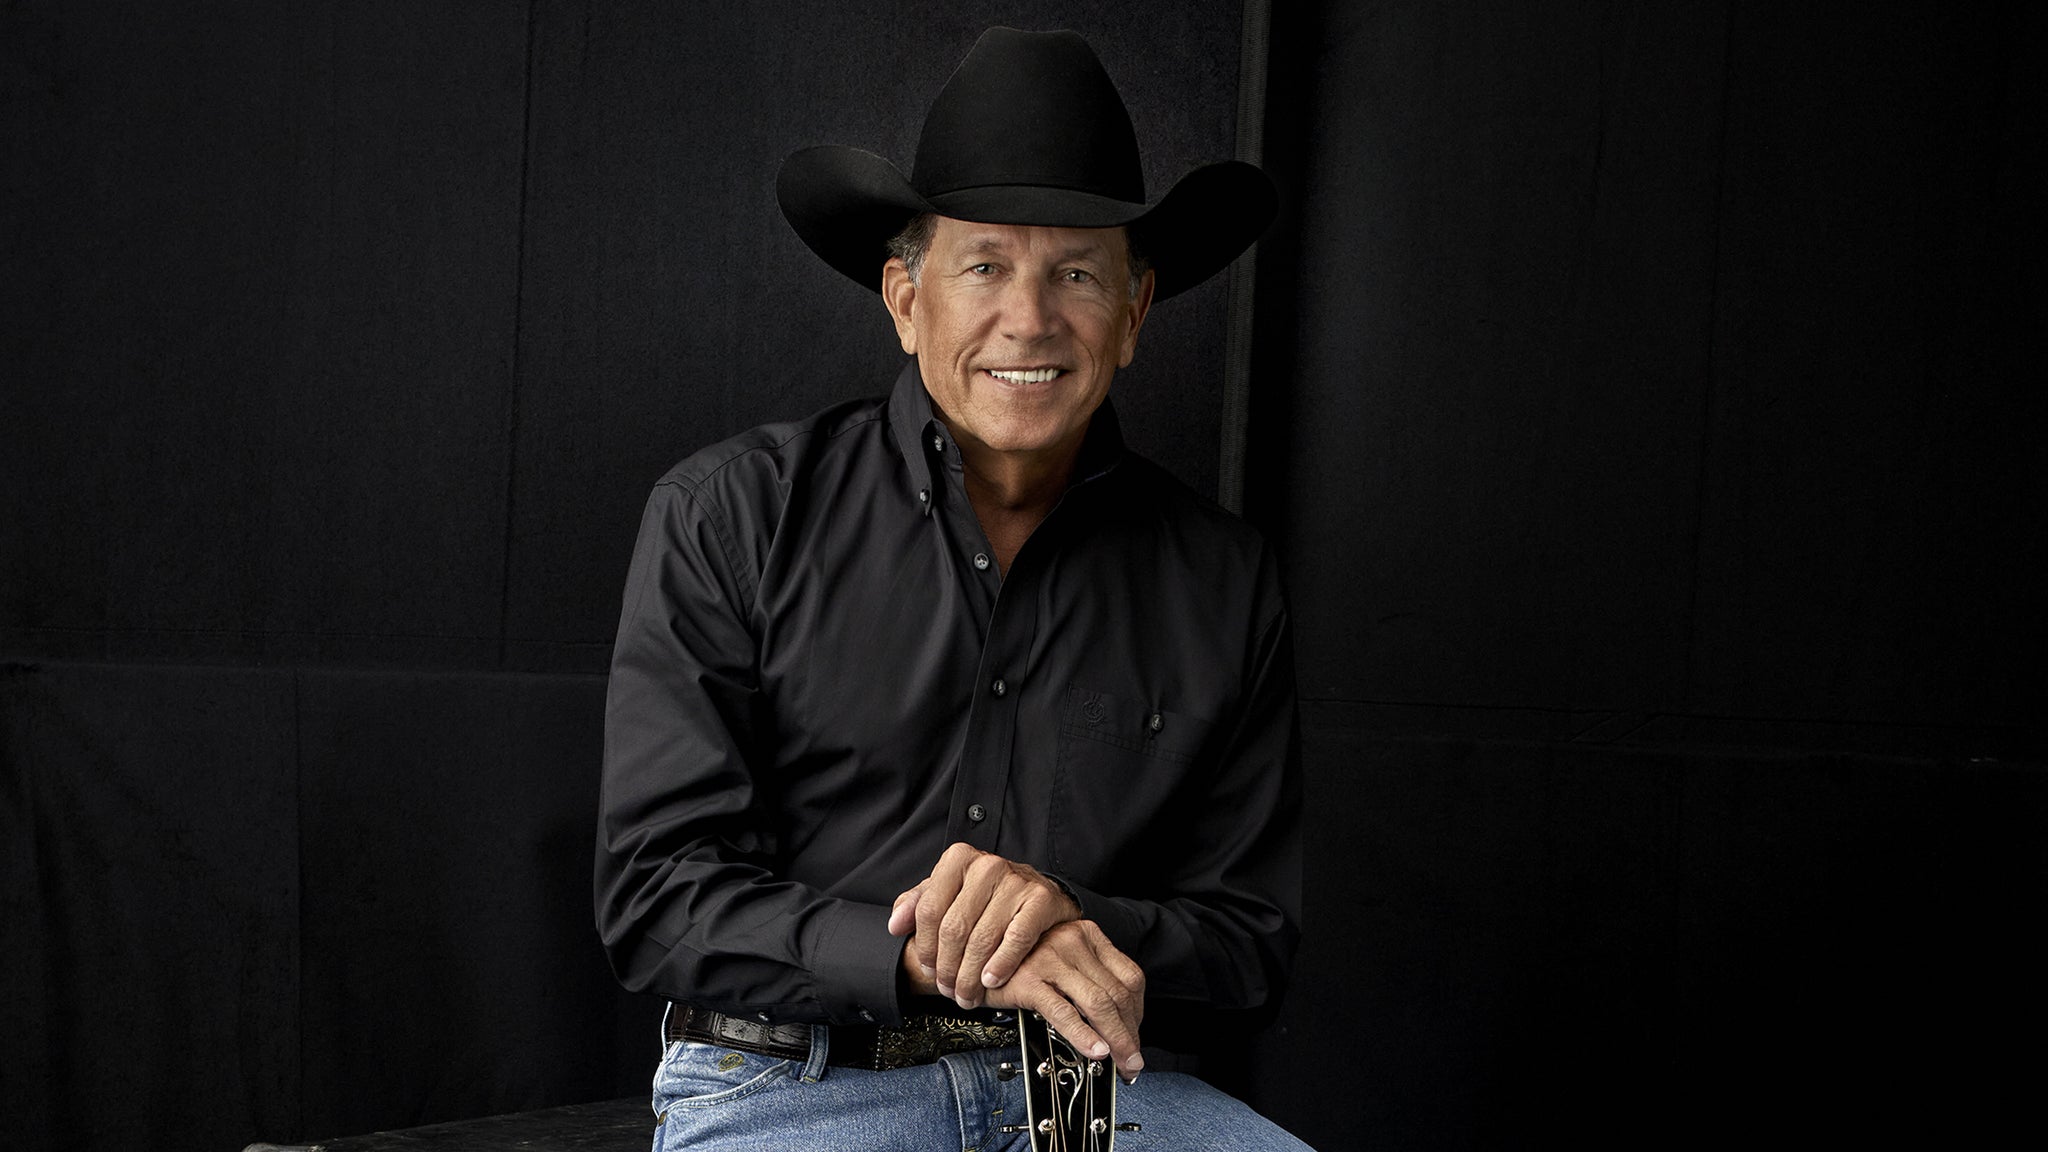 George Strait at Empower Field At Mile High - Denver, CO 80204